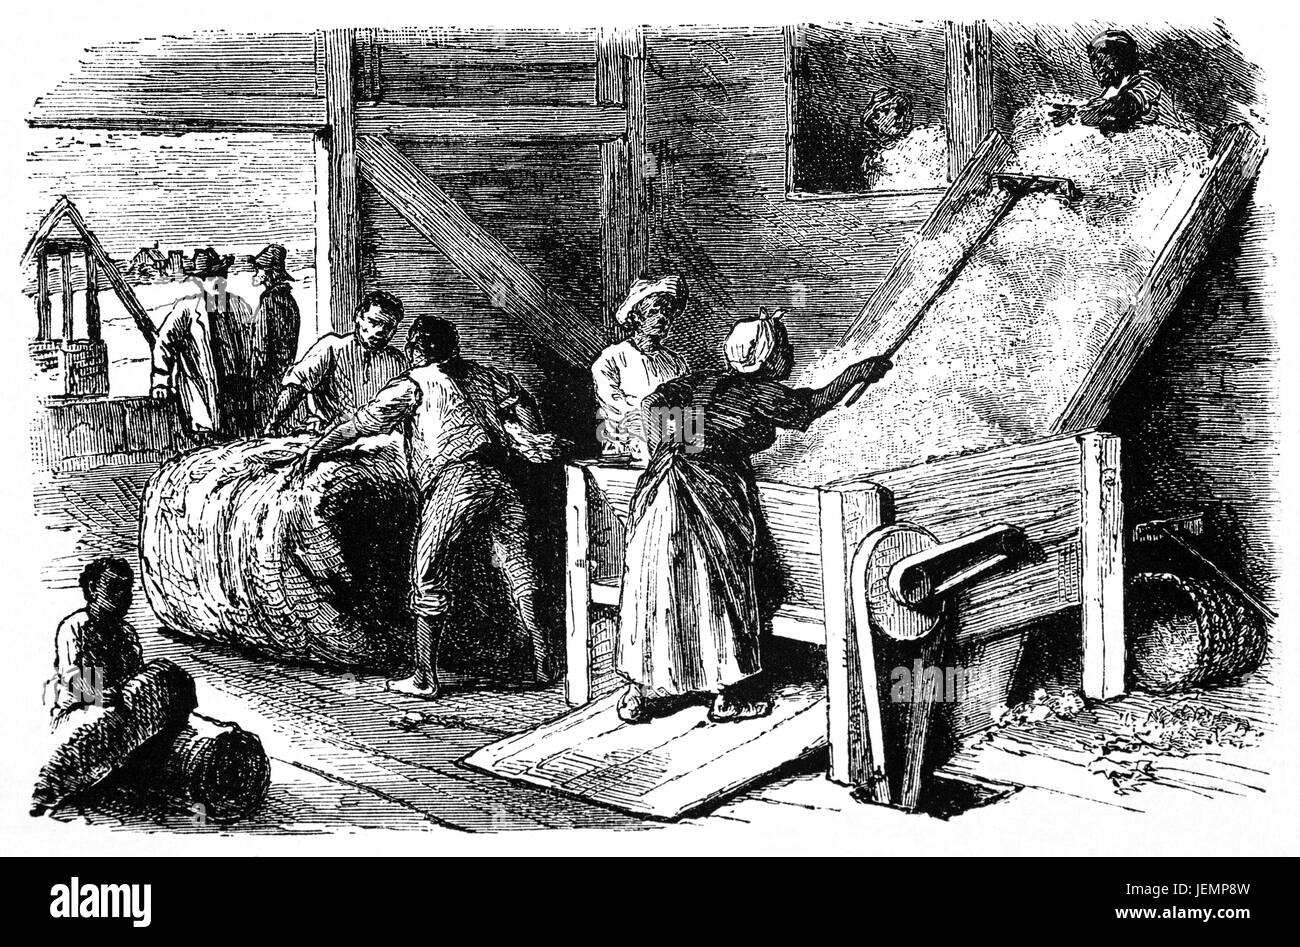 1879: Using a cotton gin, a machine that quickly and easily separates cotton fibers from their seeds, allowing for  greater productivity than manual cotton separation, Georgia State, United States of America Stock Photo